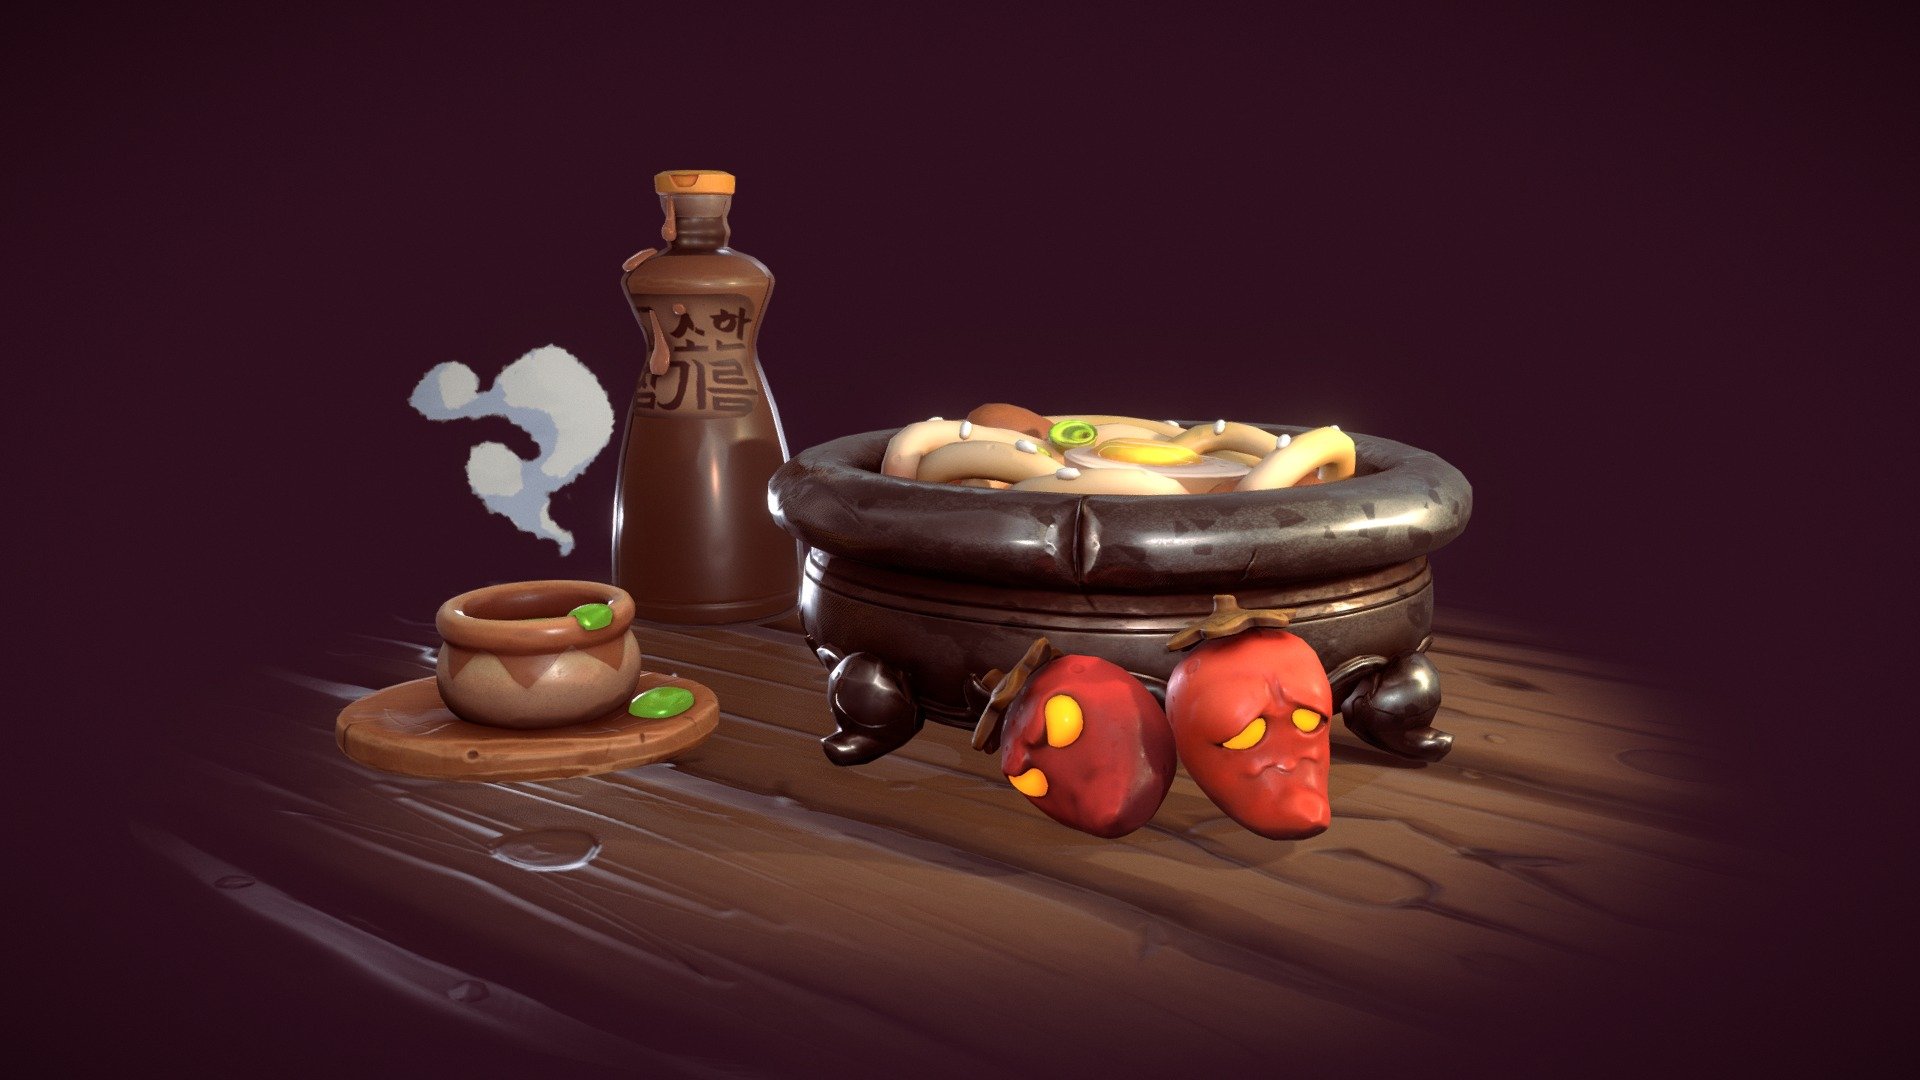 Here's my project during August, I decided to recreate in 3D some Korean foods props. 

Original concept by Camille Peyrebere, check out here awesome work here: https://www.artstation.com/artwork/Pomay8 - Korean Food - 3D model by MaxRey (@MaxReu) 3d model